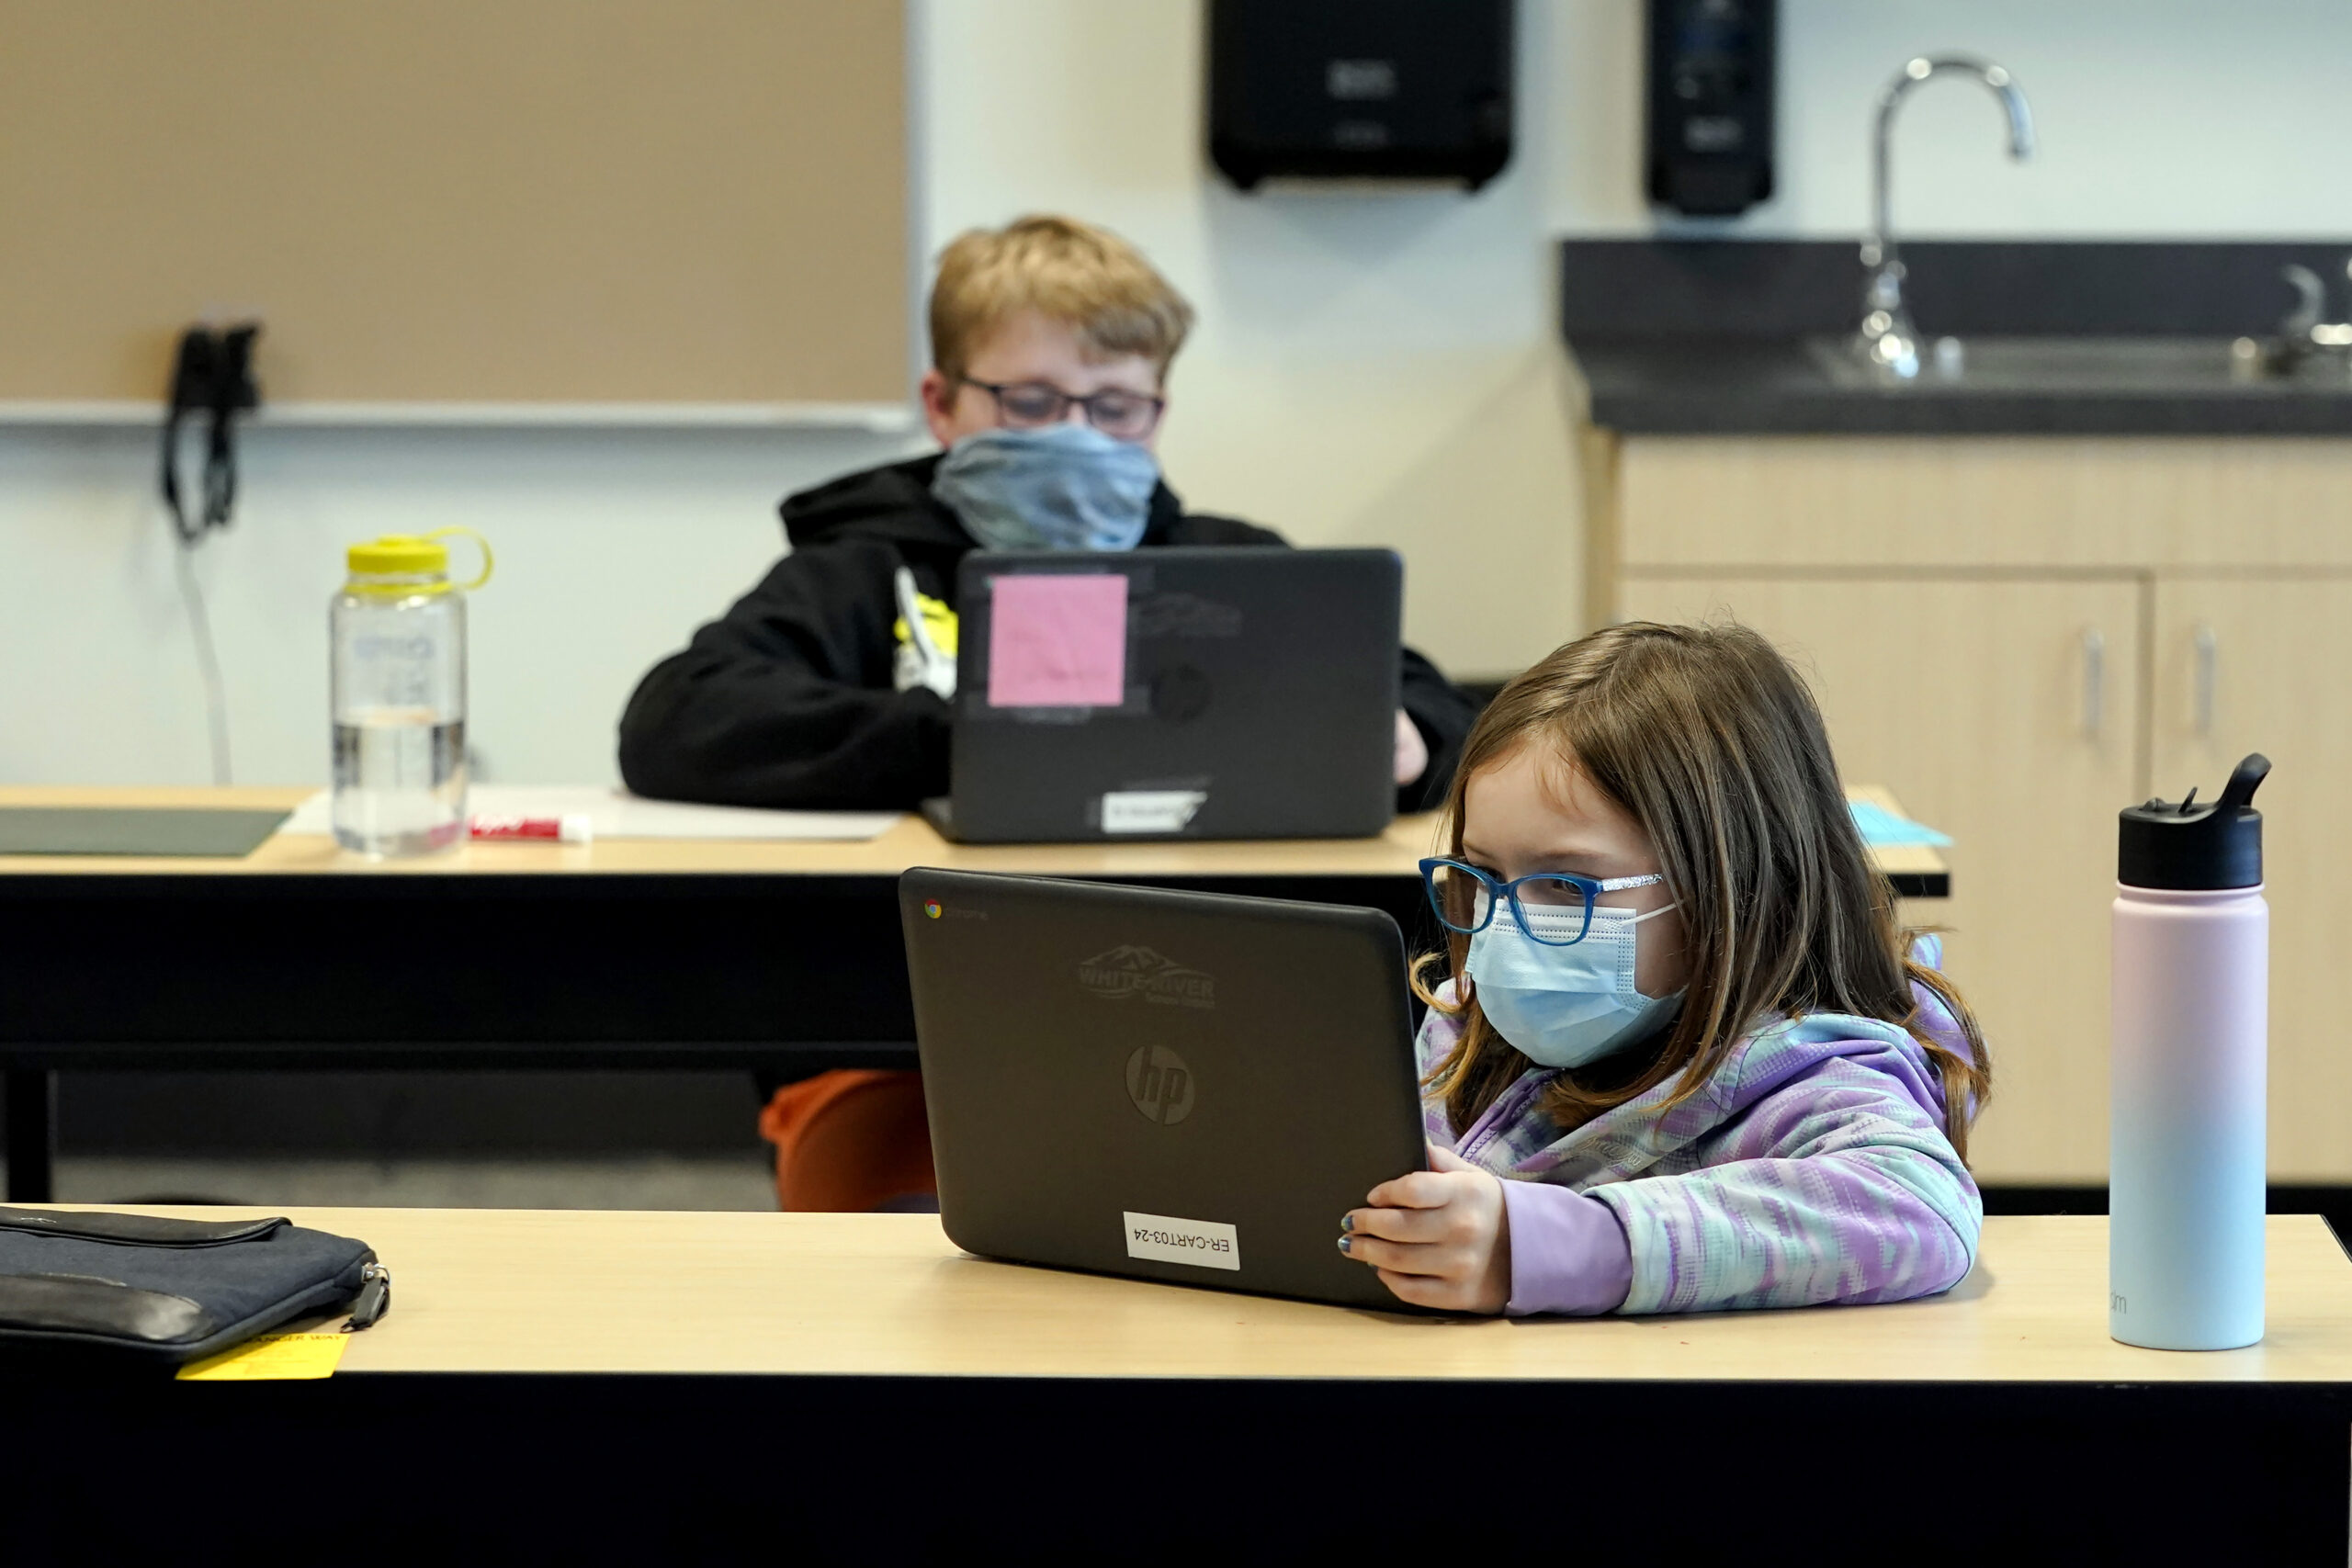 FILE - In this Feb. 2, 2021, file photo, students wear masks as they work in a fourth-grade classroom, at Elk Ridge Elementary School in Buckley, Wash. Amid mounting tensions about school reopening, the Centers for Disease Control and Prevention planned to release long-awaited guidance Friday, Feb. 12, 2021, on what measures are needed to get children back into the classroom during the pandemic. (AP Photo/Ted S. Warren, File)